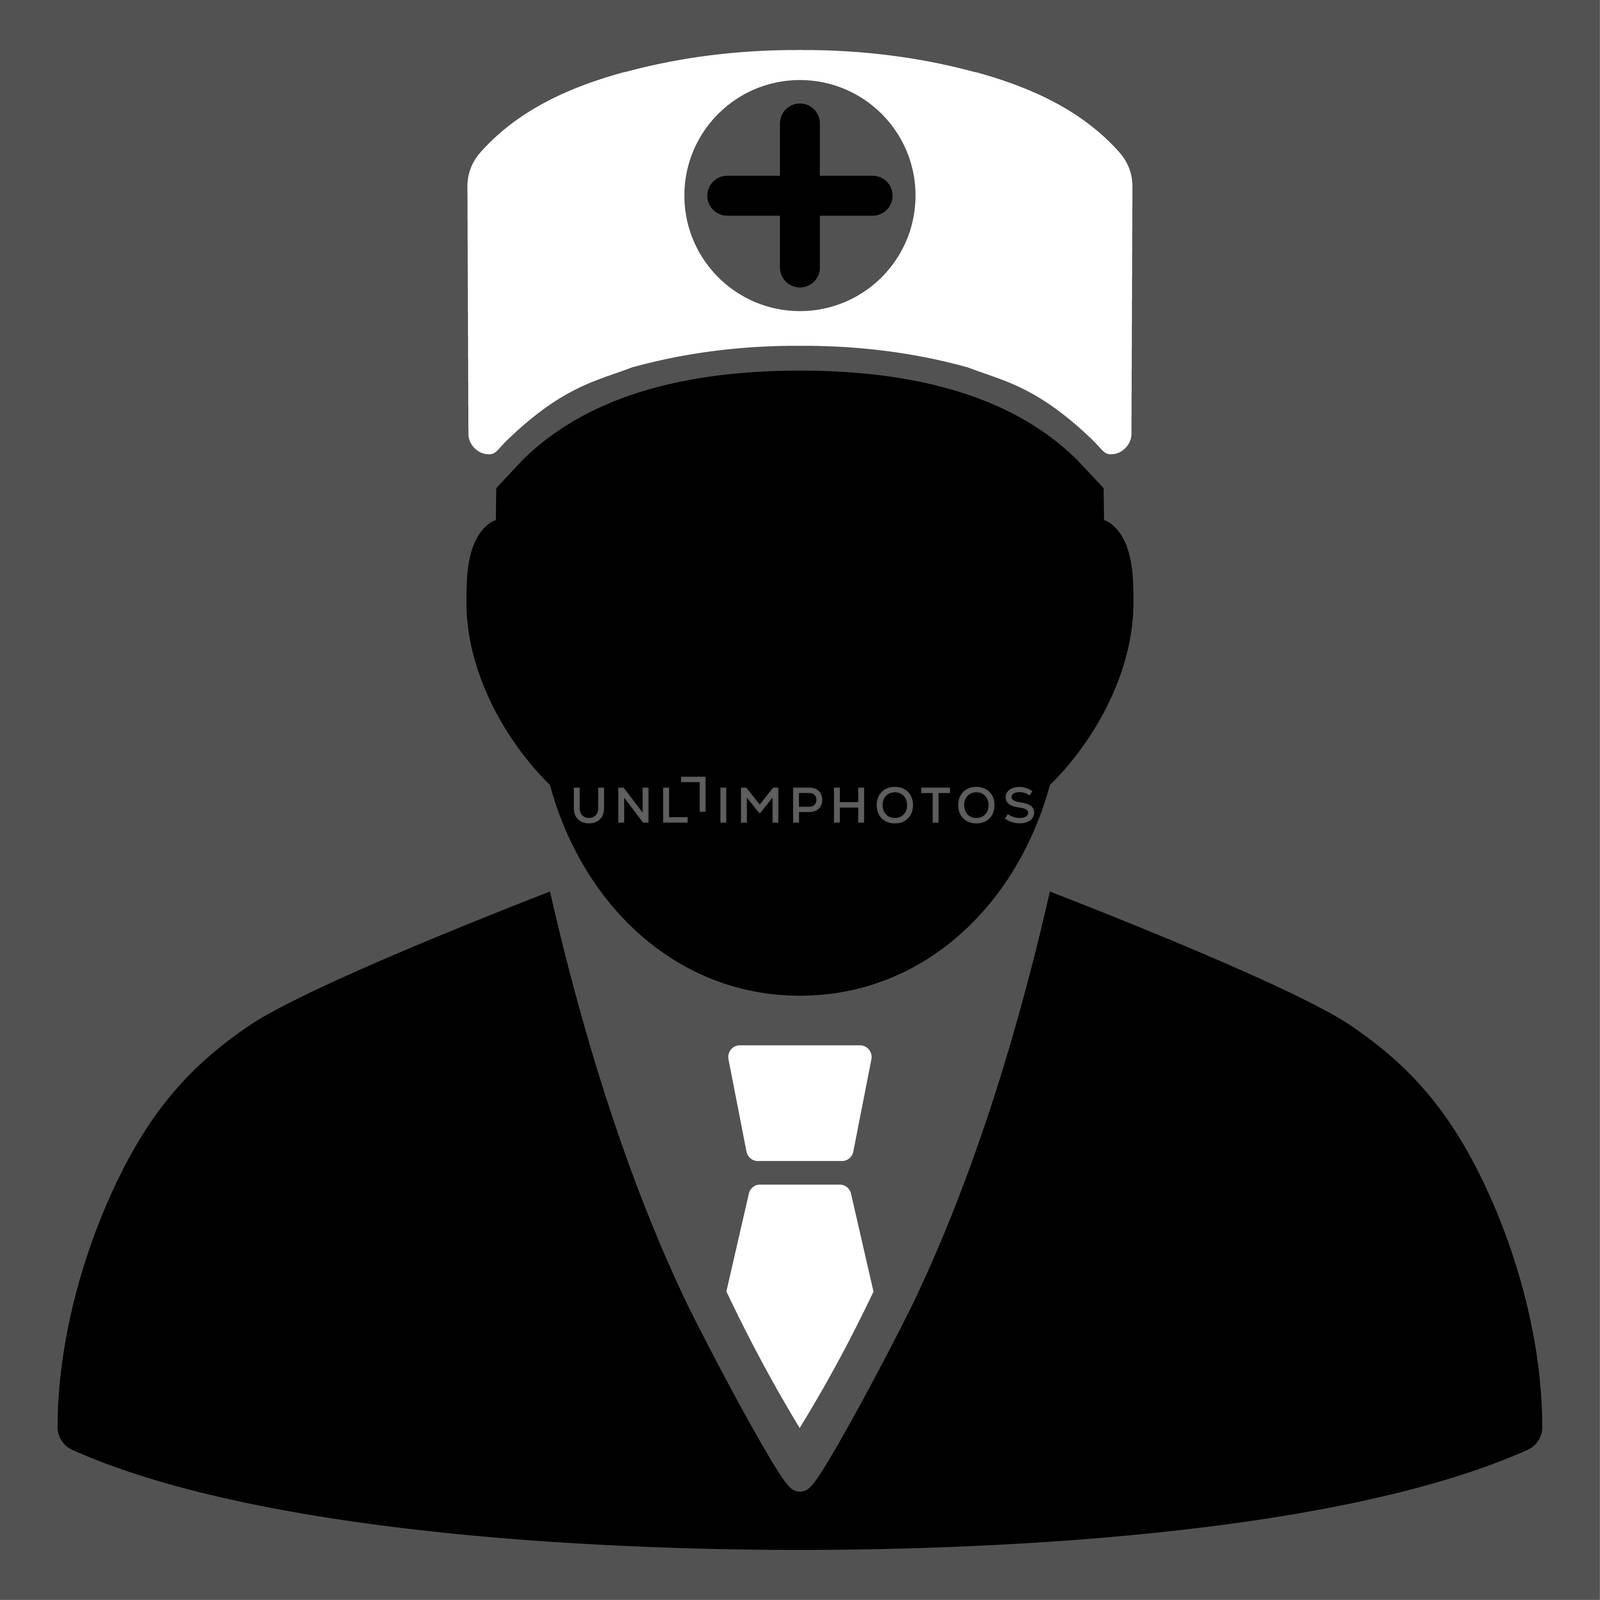 Head Physician raster icon. Style is bicolor flat symbol, black and white colors, rounded angles, gray background.